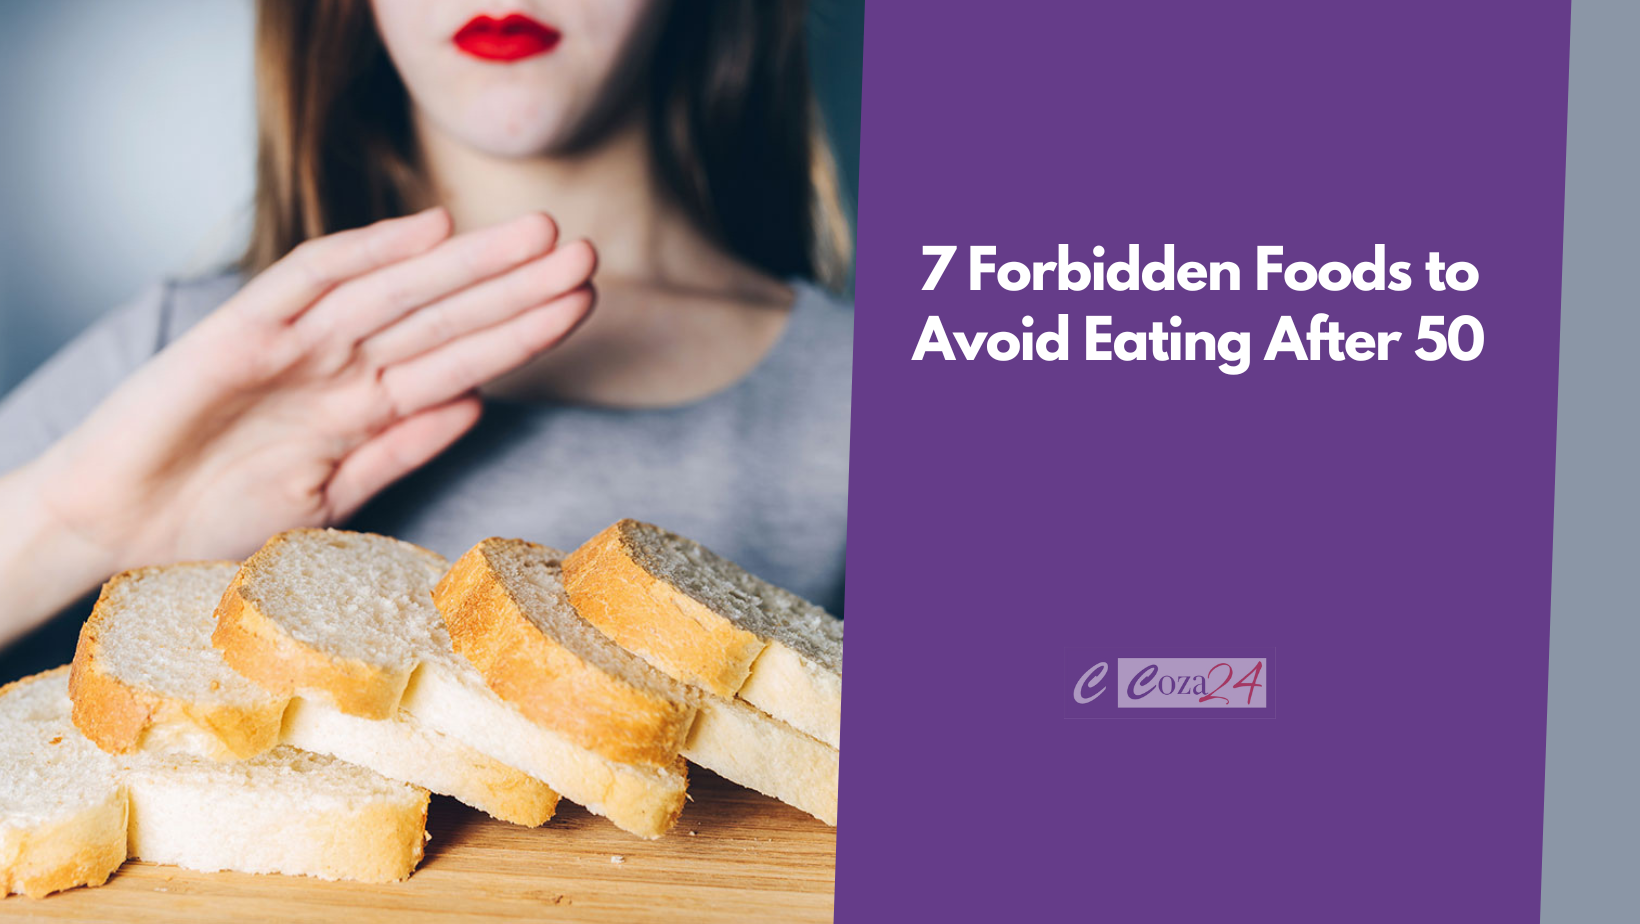 7 Forbidden Foods to Avoid Eating After 50